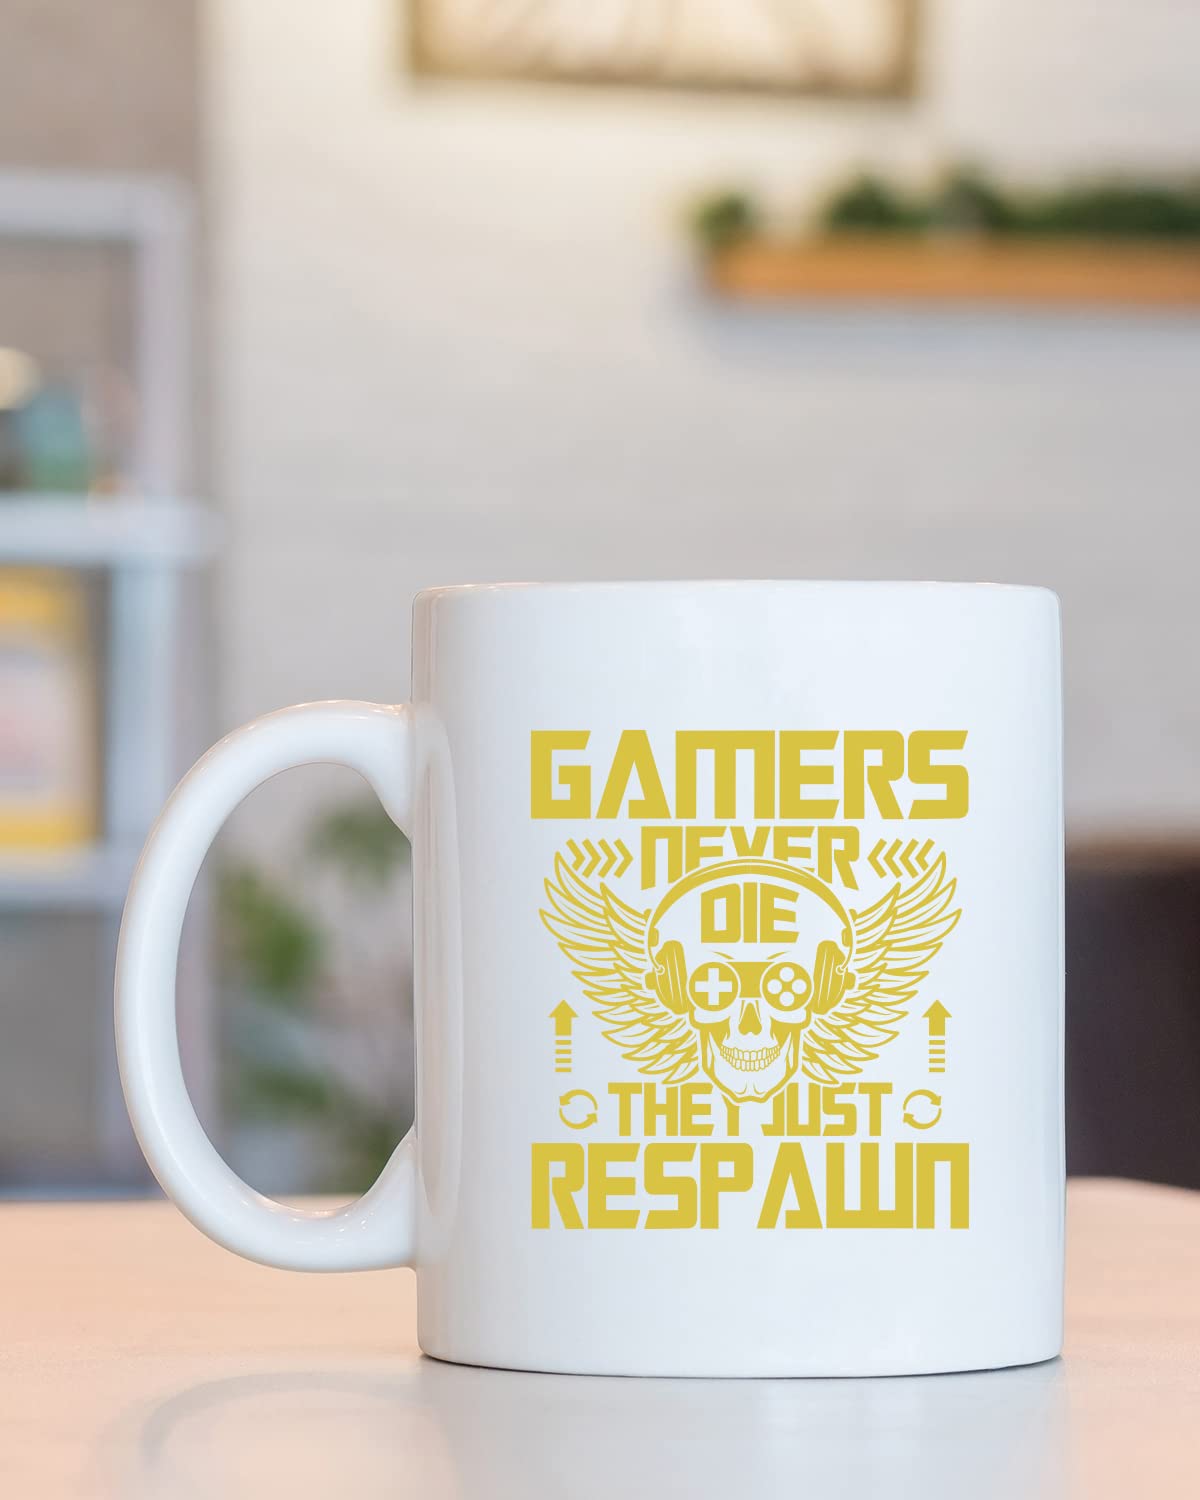 GAMERS NEVER DIE Coffee Mug - Unique Gifts For Game Lovers, Gamer Mugs, Gifts For Gaming Fans, Gaming Coffee Cup for Husband Boyfriend Birthday, Valentine's Day Gift, Birthday Gift for gamer nerds